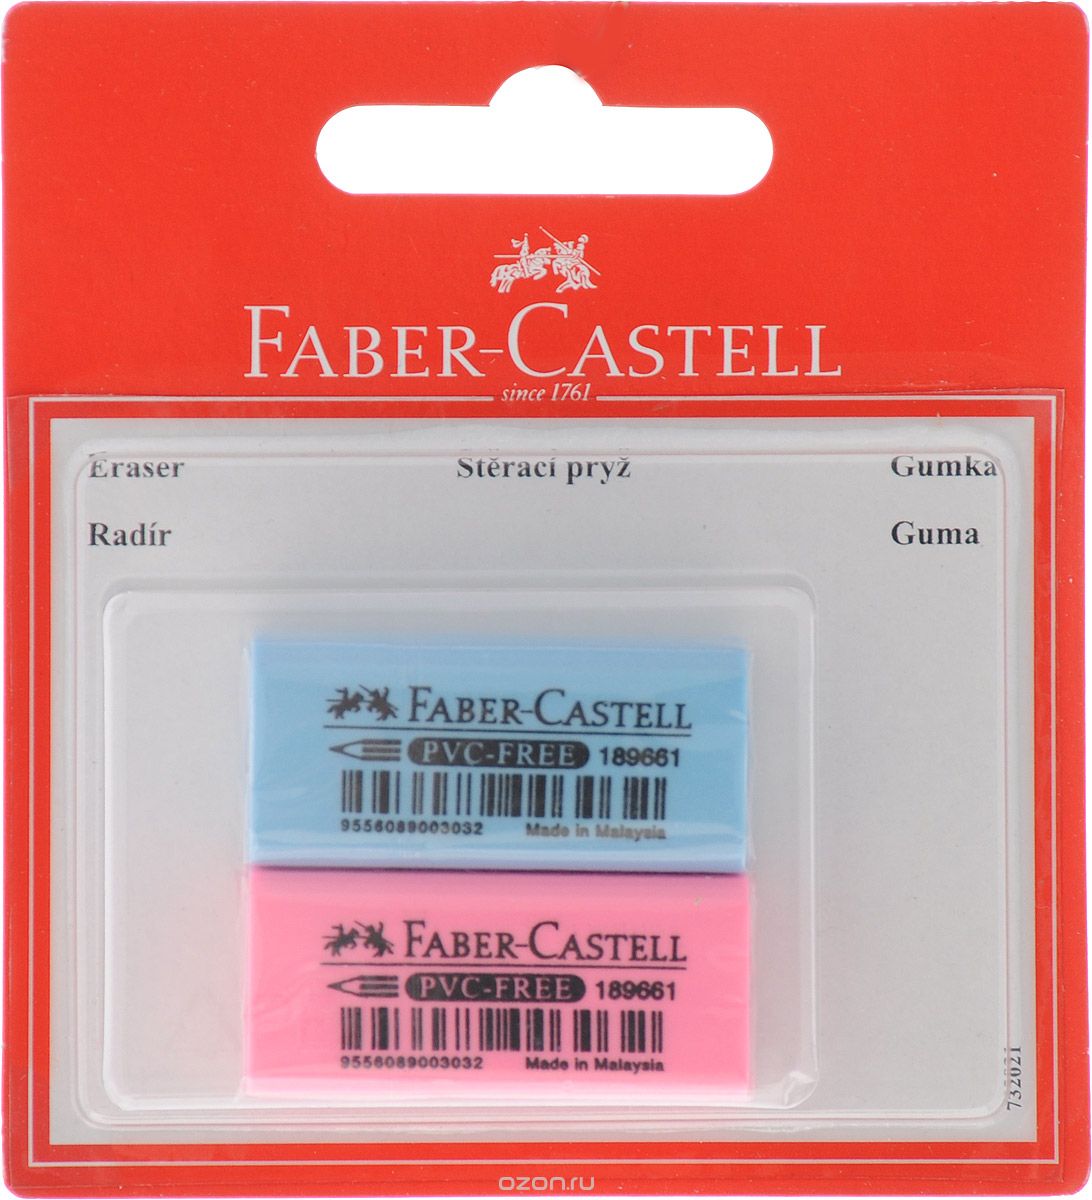 Faber-Castell      2 